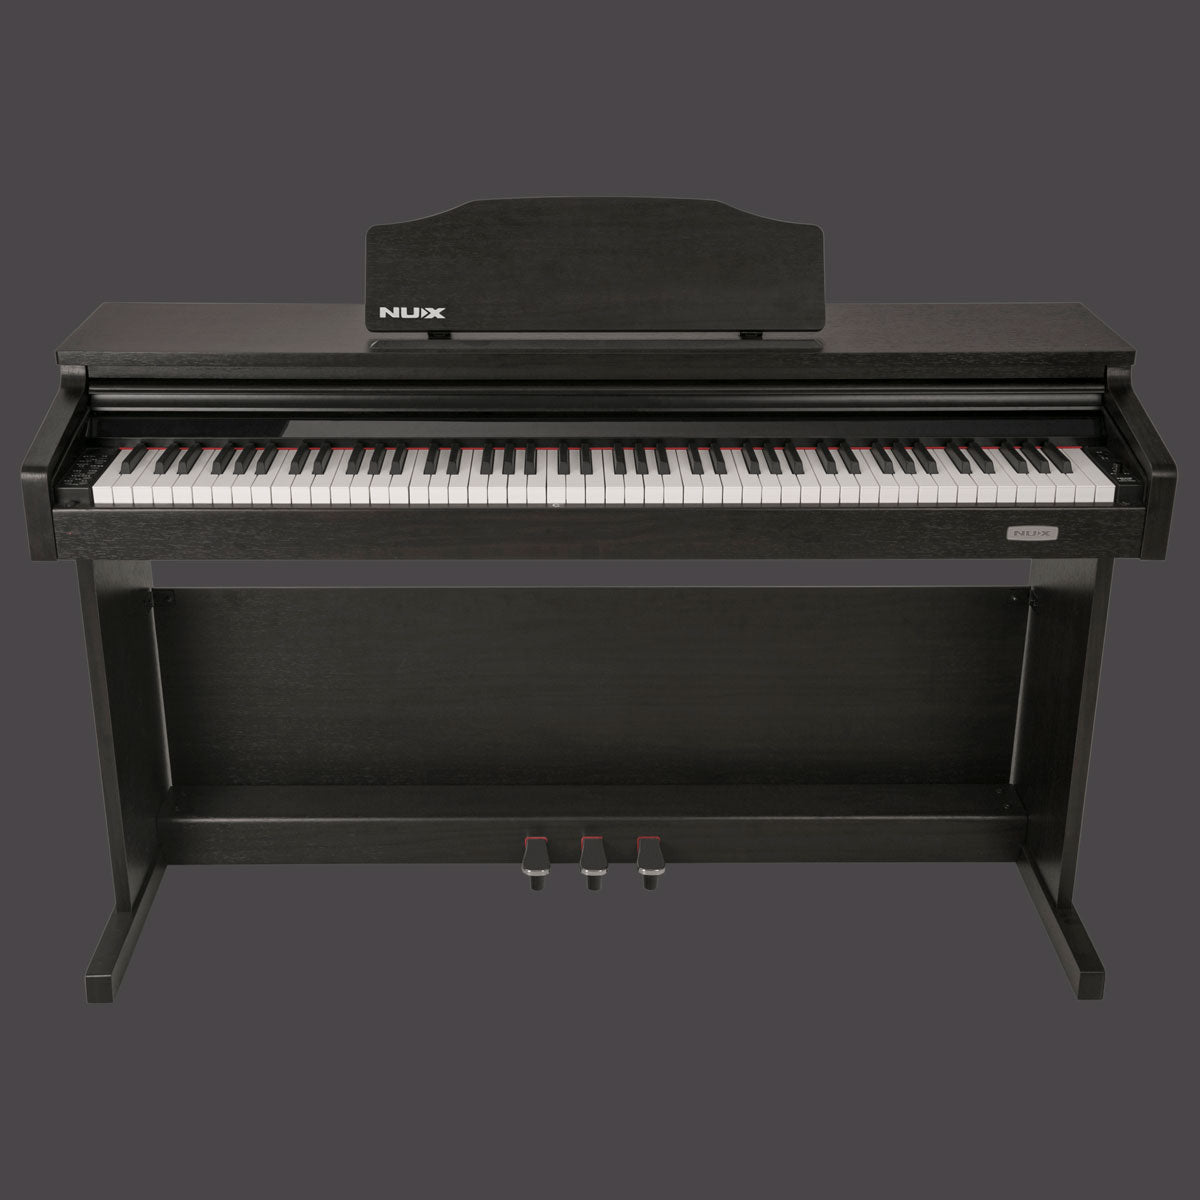 Nux WK 520 88 Key Digital Piano with Hammer Action Keyboard